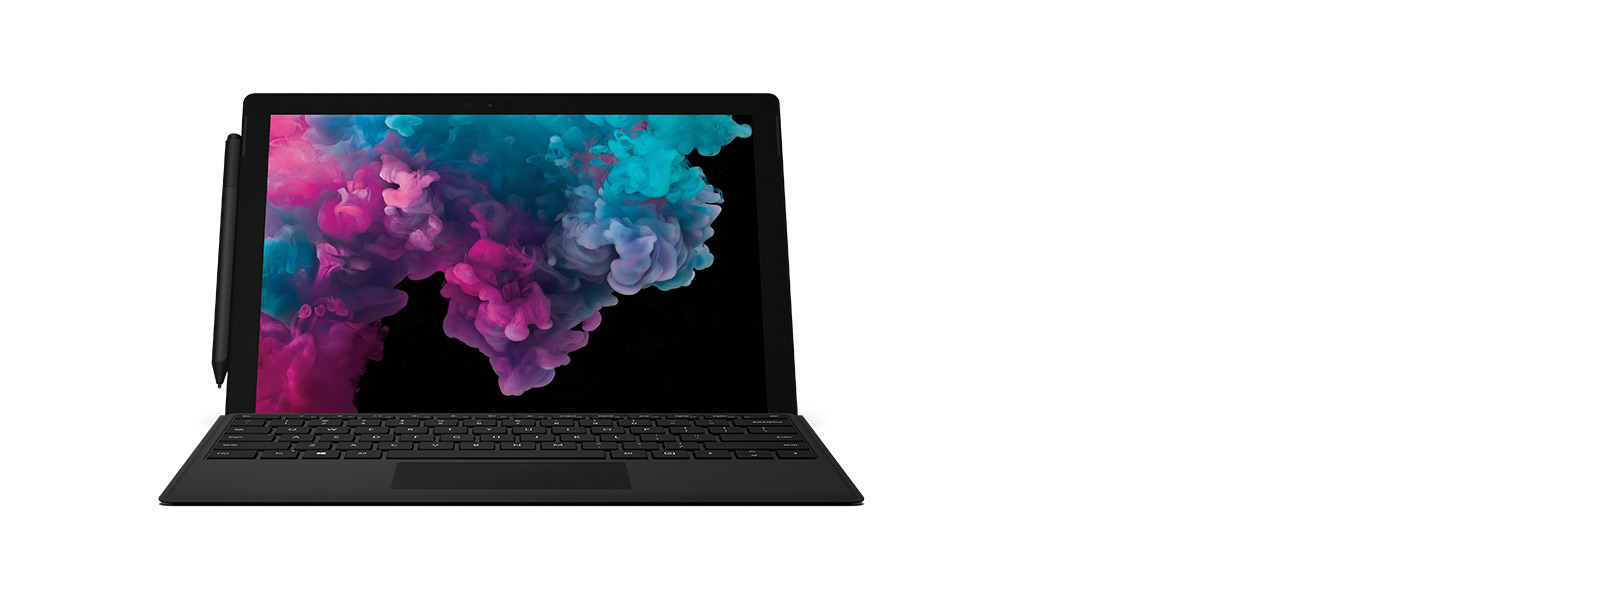 Microsoft Surface Pro 6 – Technical Specifications – Microsoft Surface